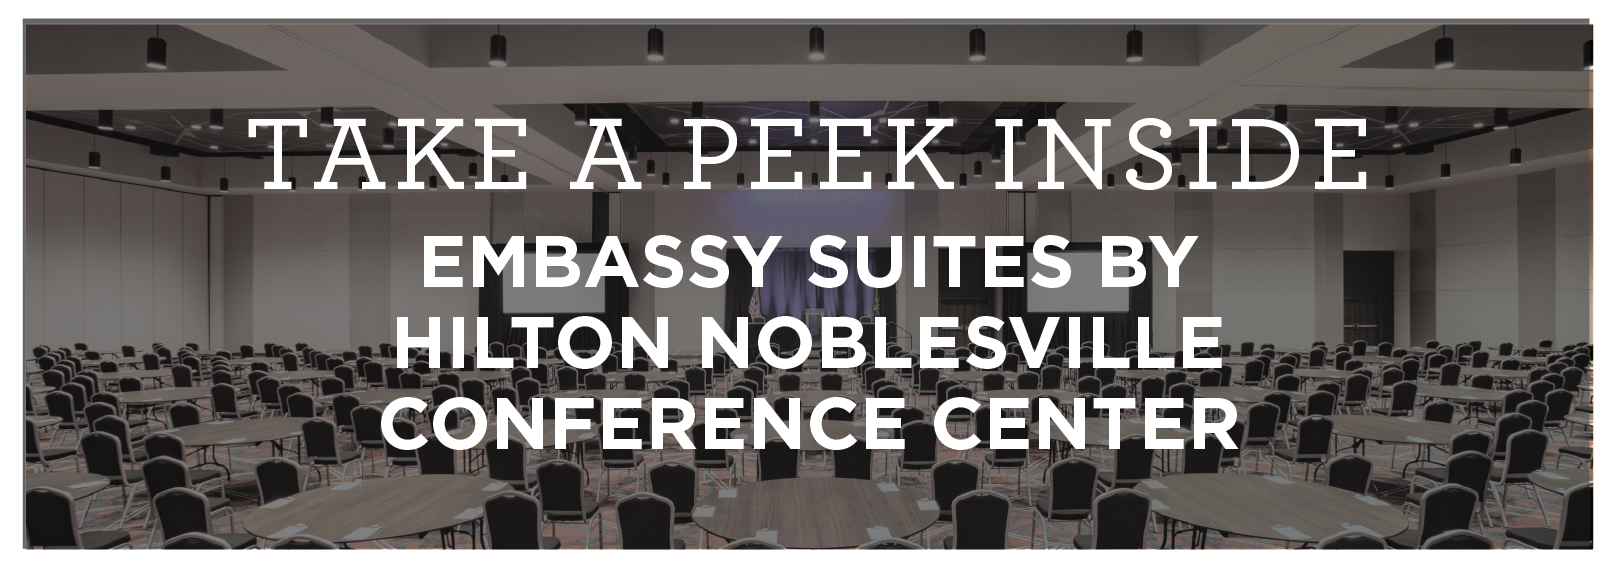 Embassy Suites by Hilton Noblesville Indianapolis Conference Center Virtual Tour 